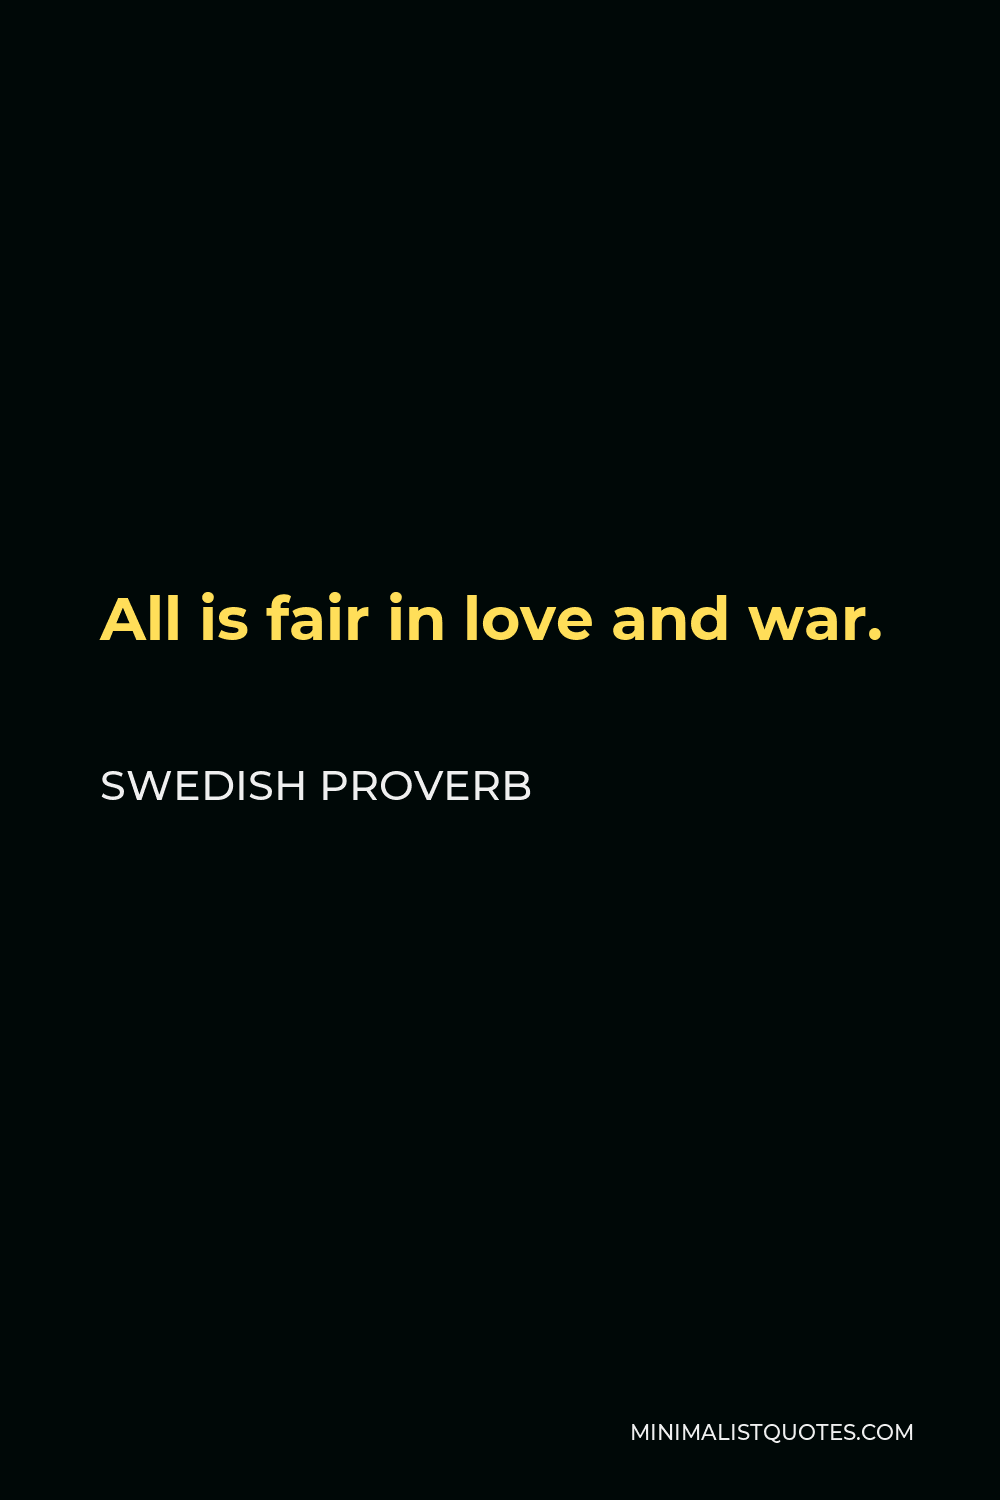 Swedish Proverb Quote - All is fair in love and war.